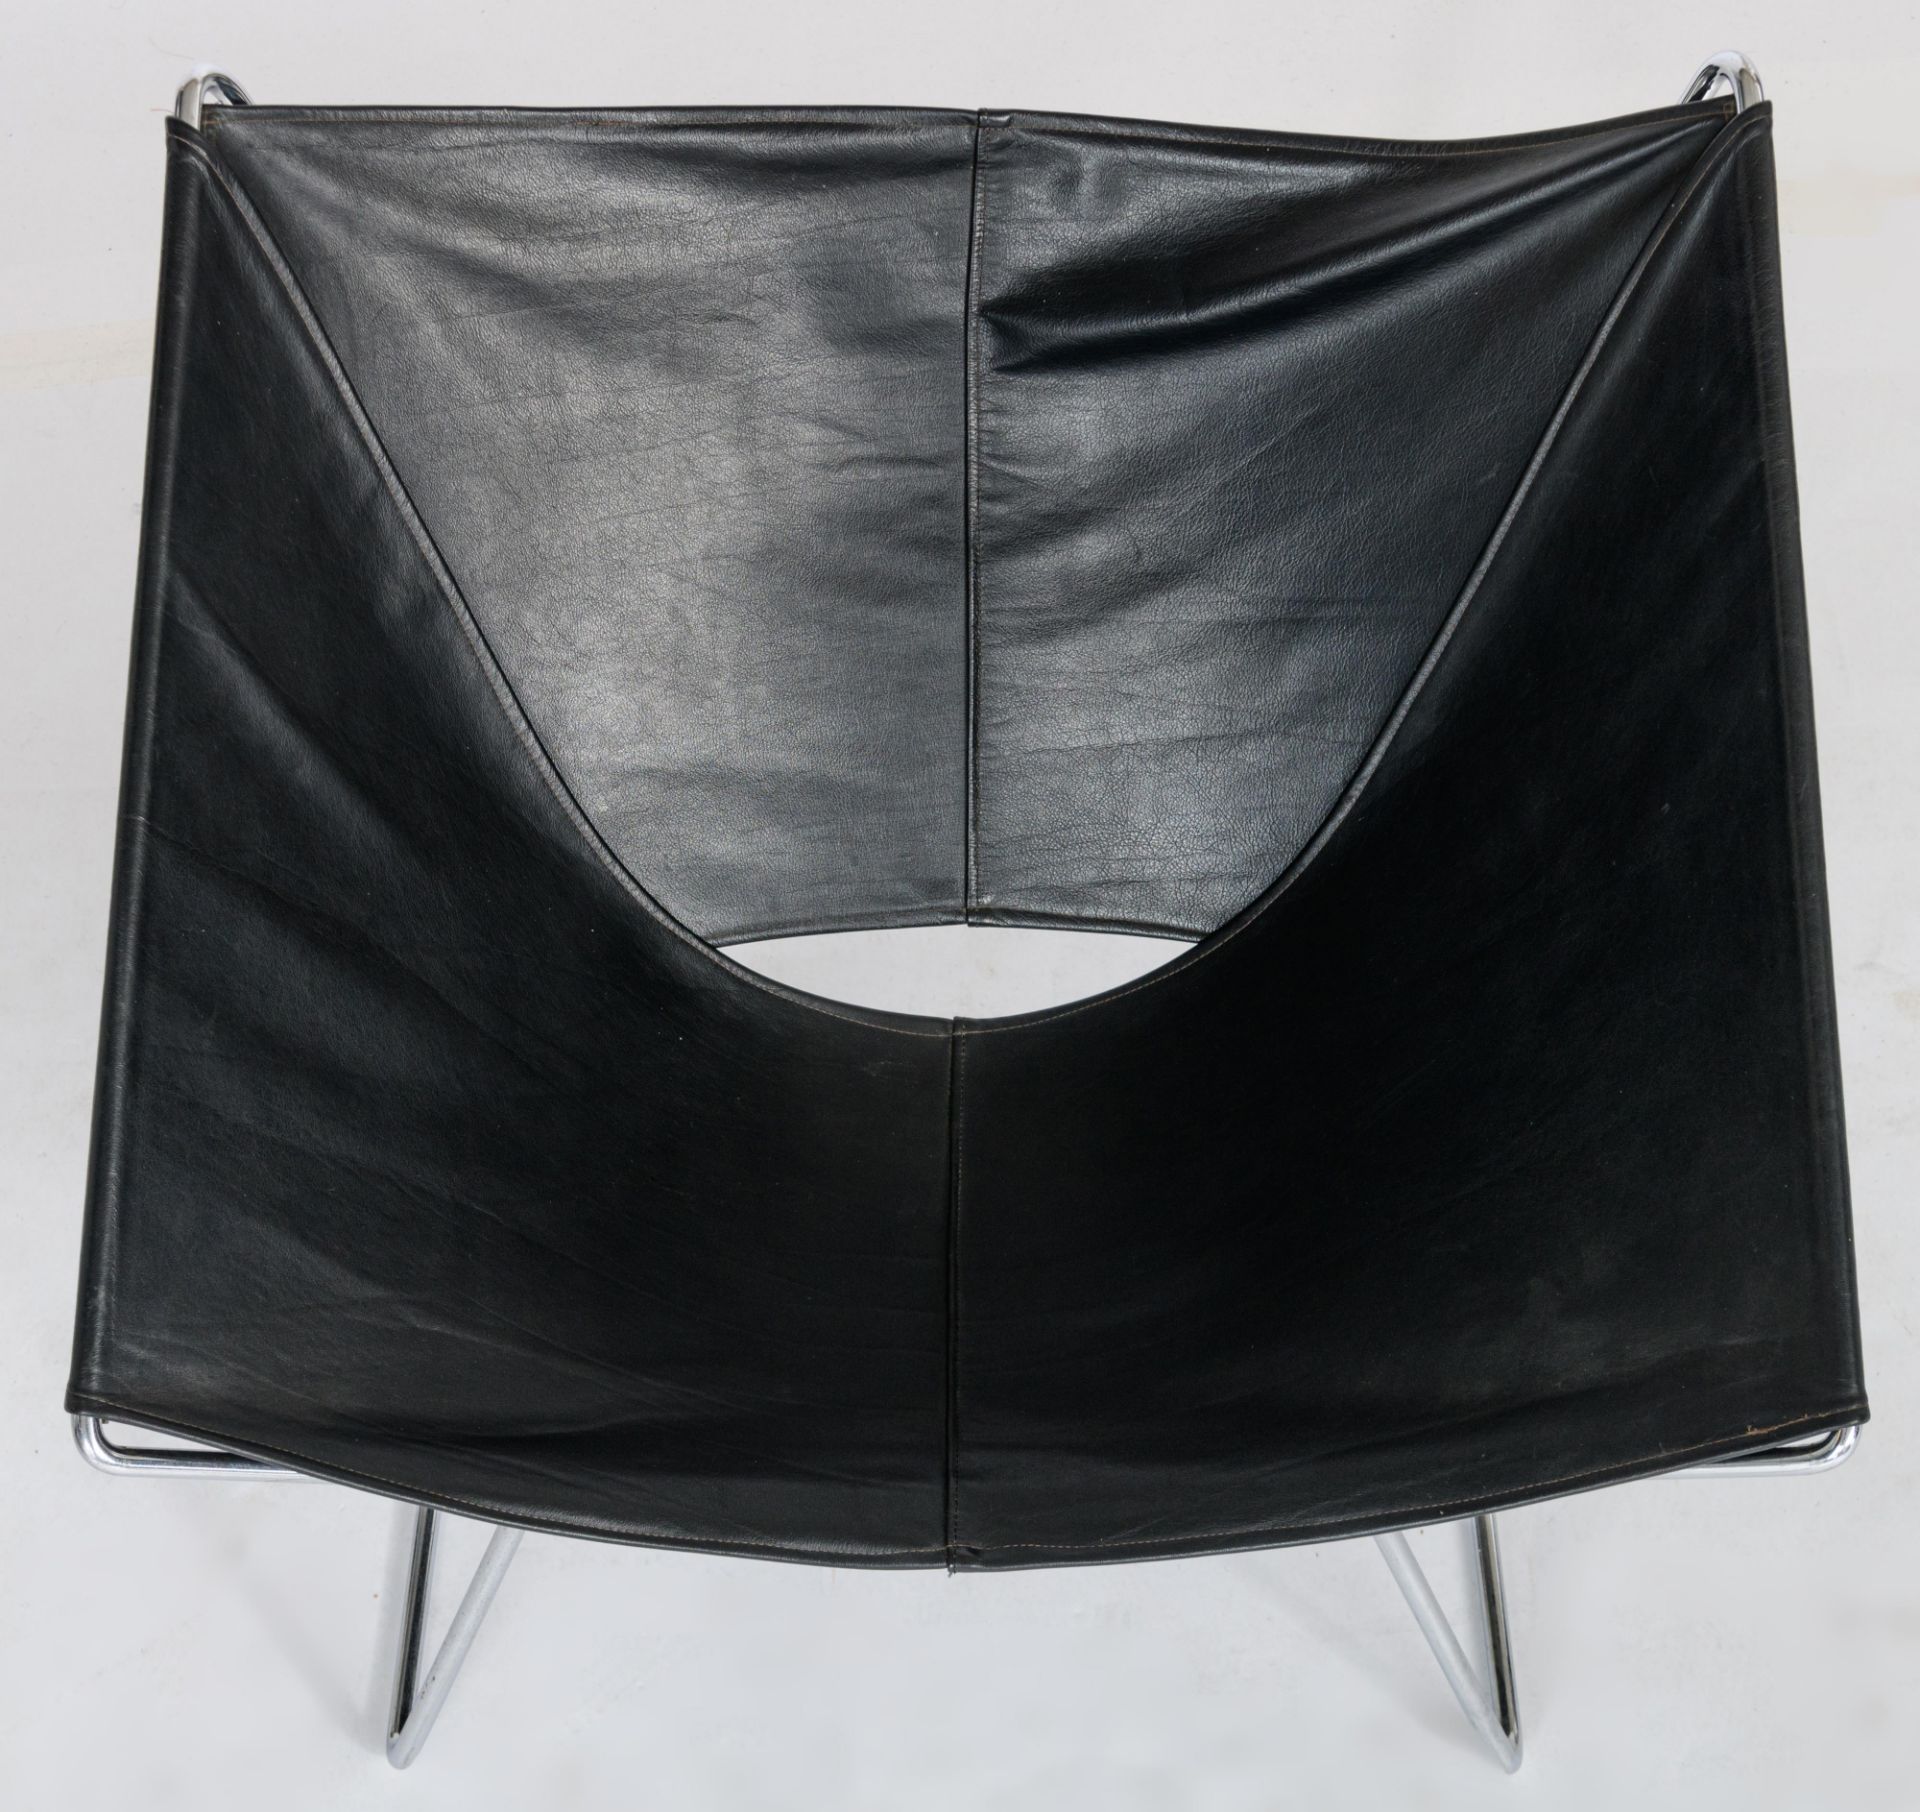 An AP-14 'butterfly' chair by Pierre Paulin for Polak, 1954, H 68,5 - W 77 - D 72 cm - Image 7 of 7